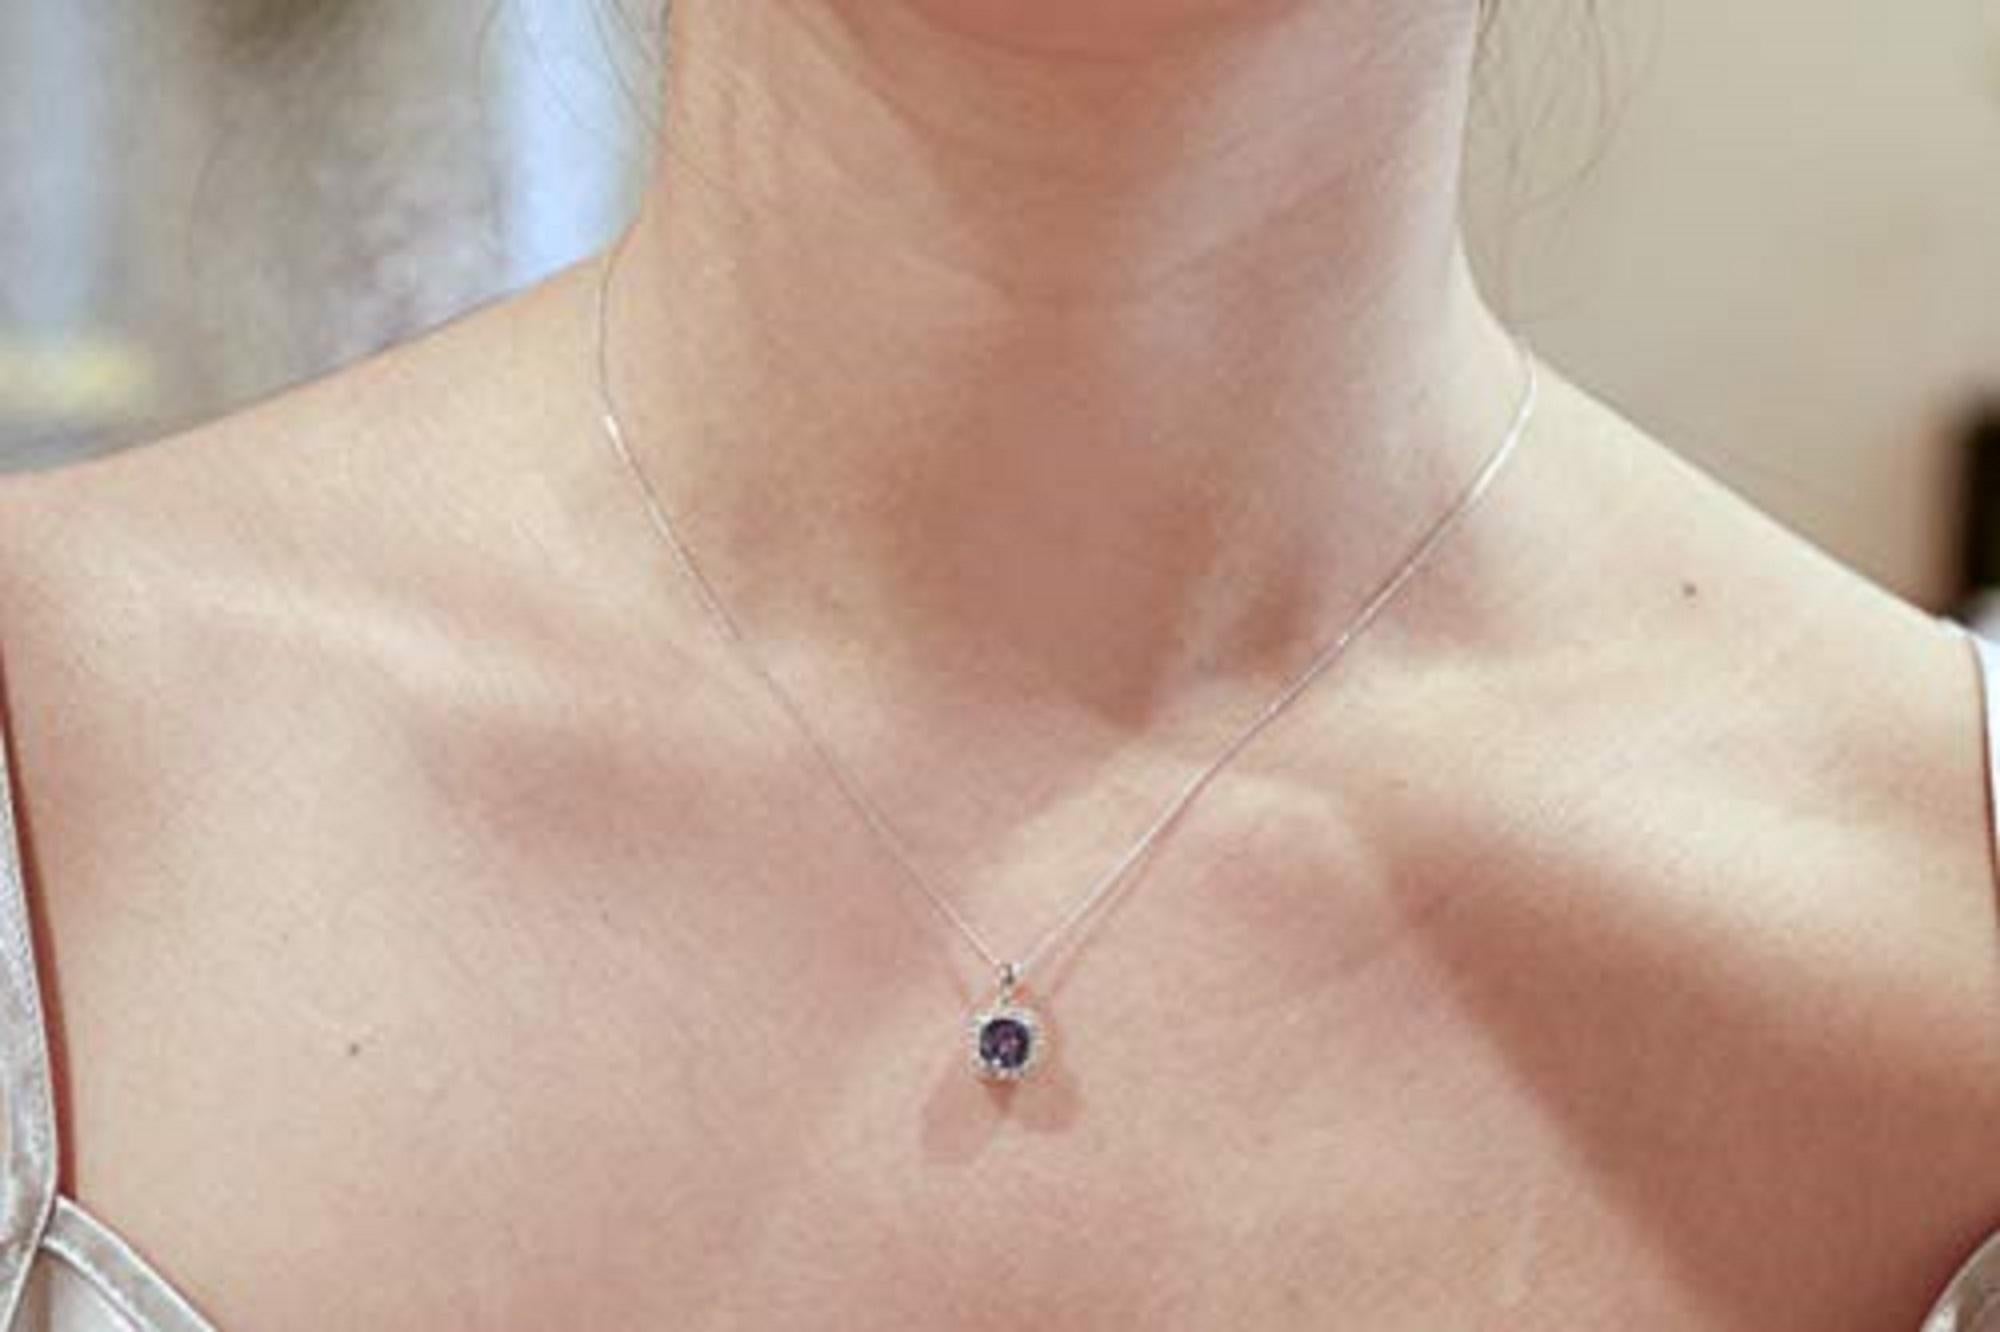 Decorate yourself in elegance with this Pendant is crafted from 14-karat White Gold by Gin & Grace Pendant. This Pendant is made up of 6MM Cushion-Cut Prong setting Genuine Tanzanite (1 Pcs) 1.15 Carat and Round-Cut Prong setting Natural White